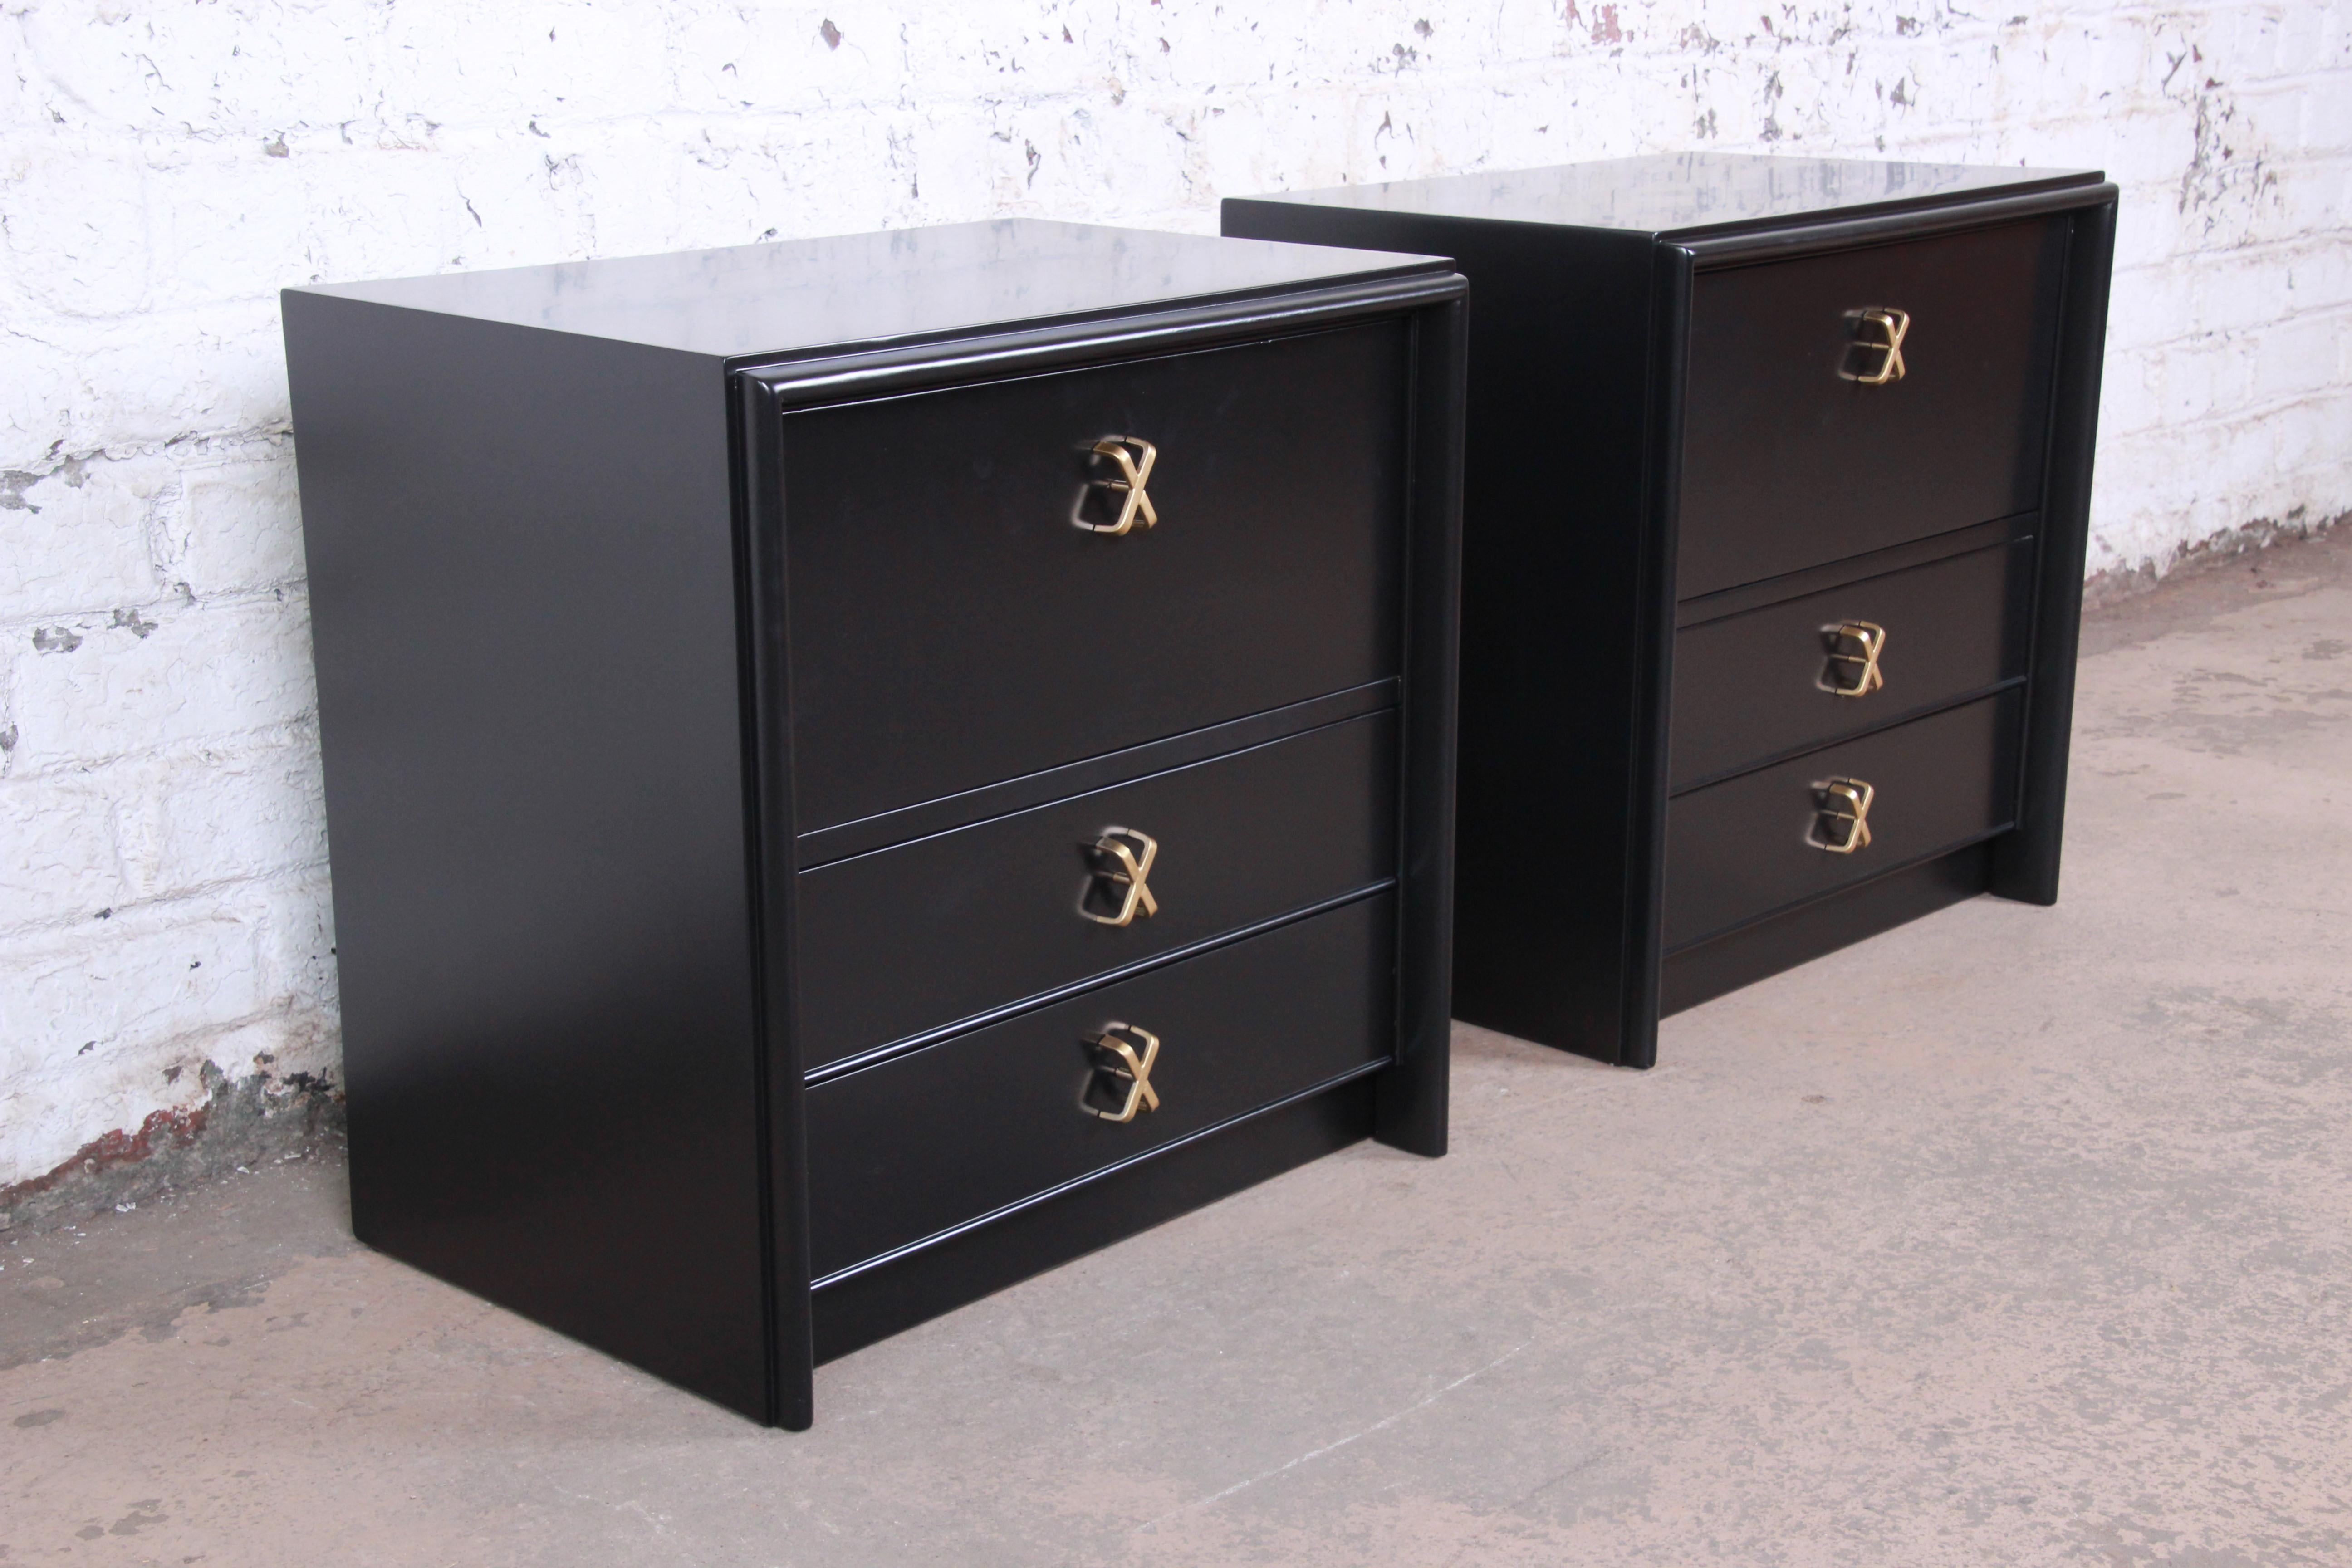 Mid-20th Century Paul Frankl for Johnson Furniture Black Lacquered Nightstands, Newly Refinished